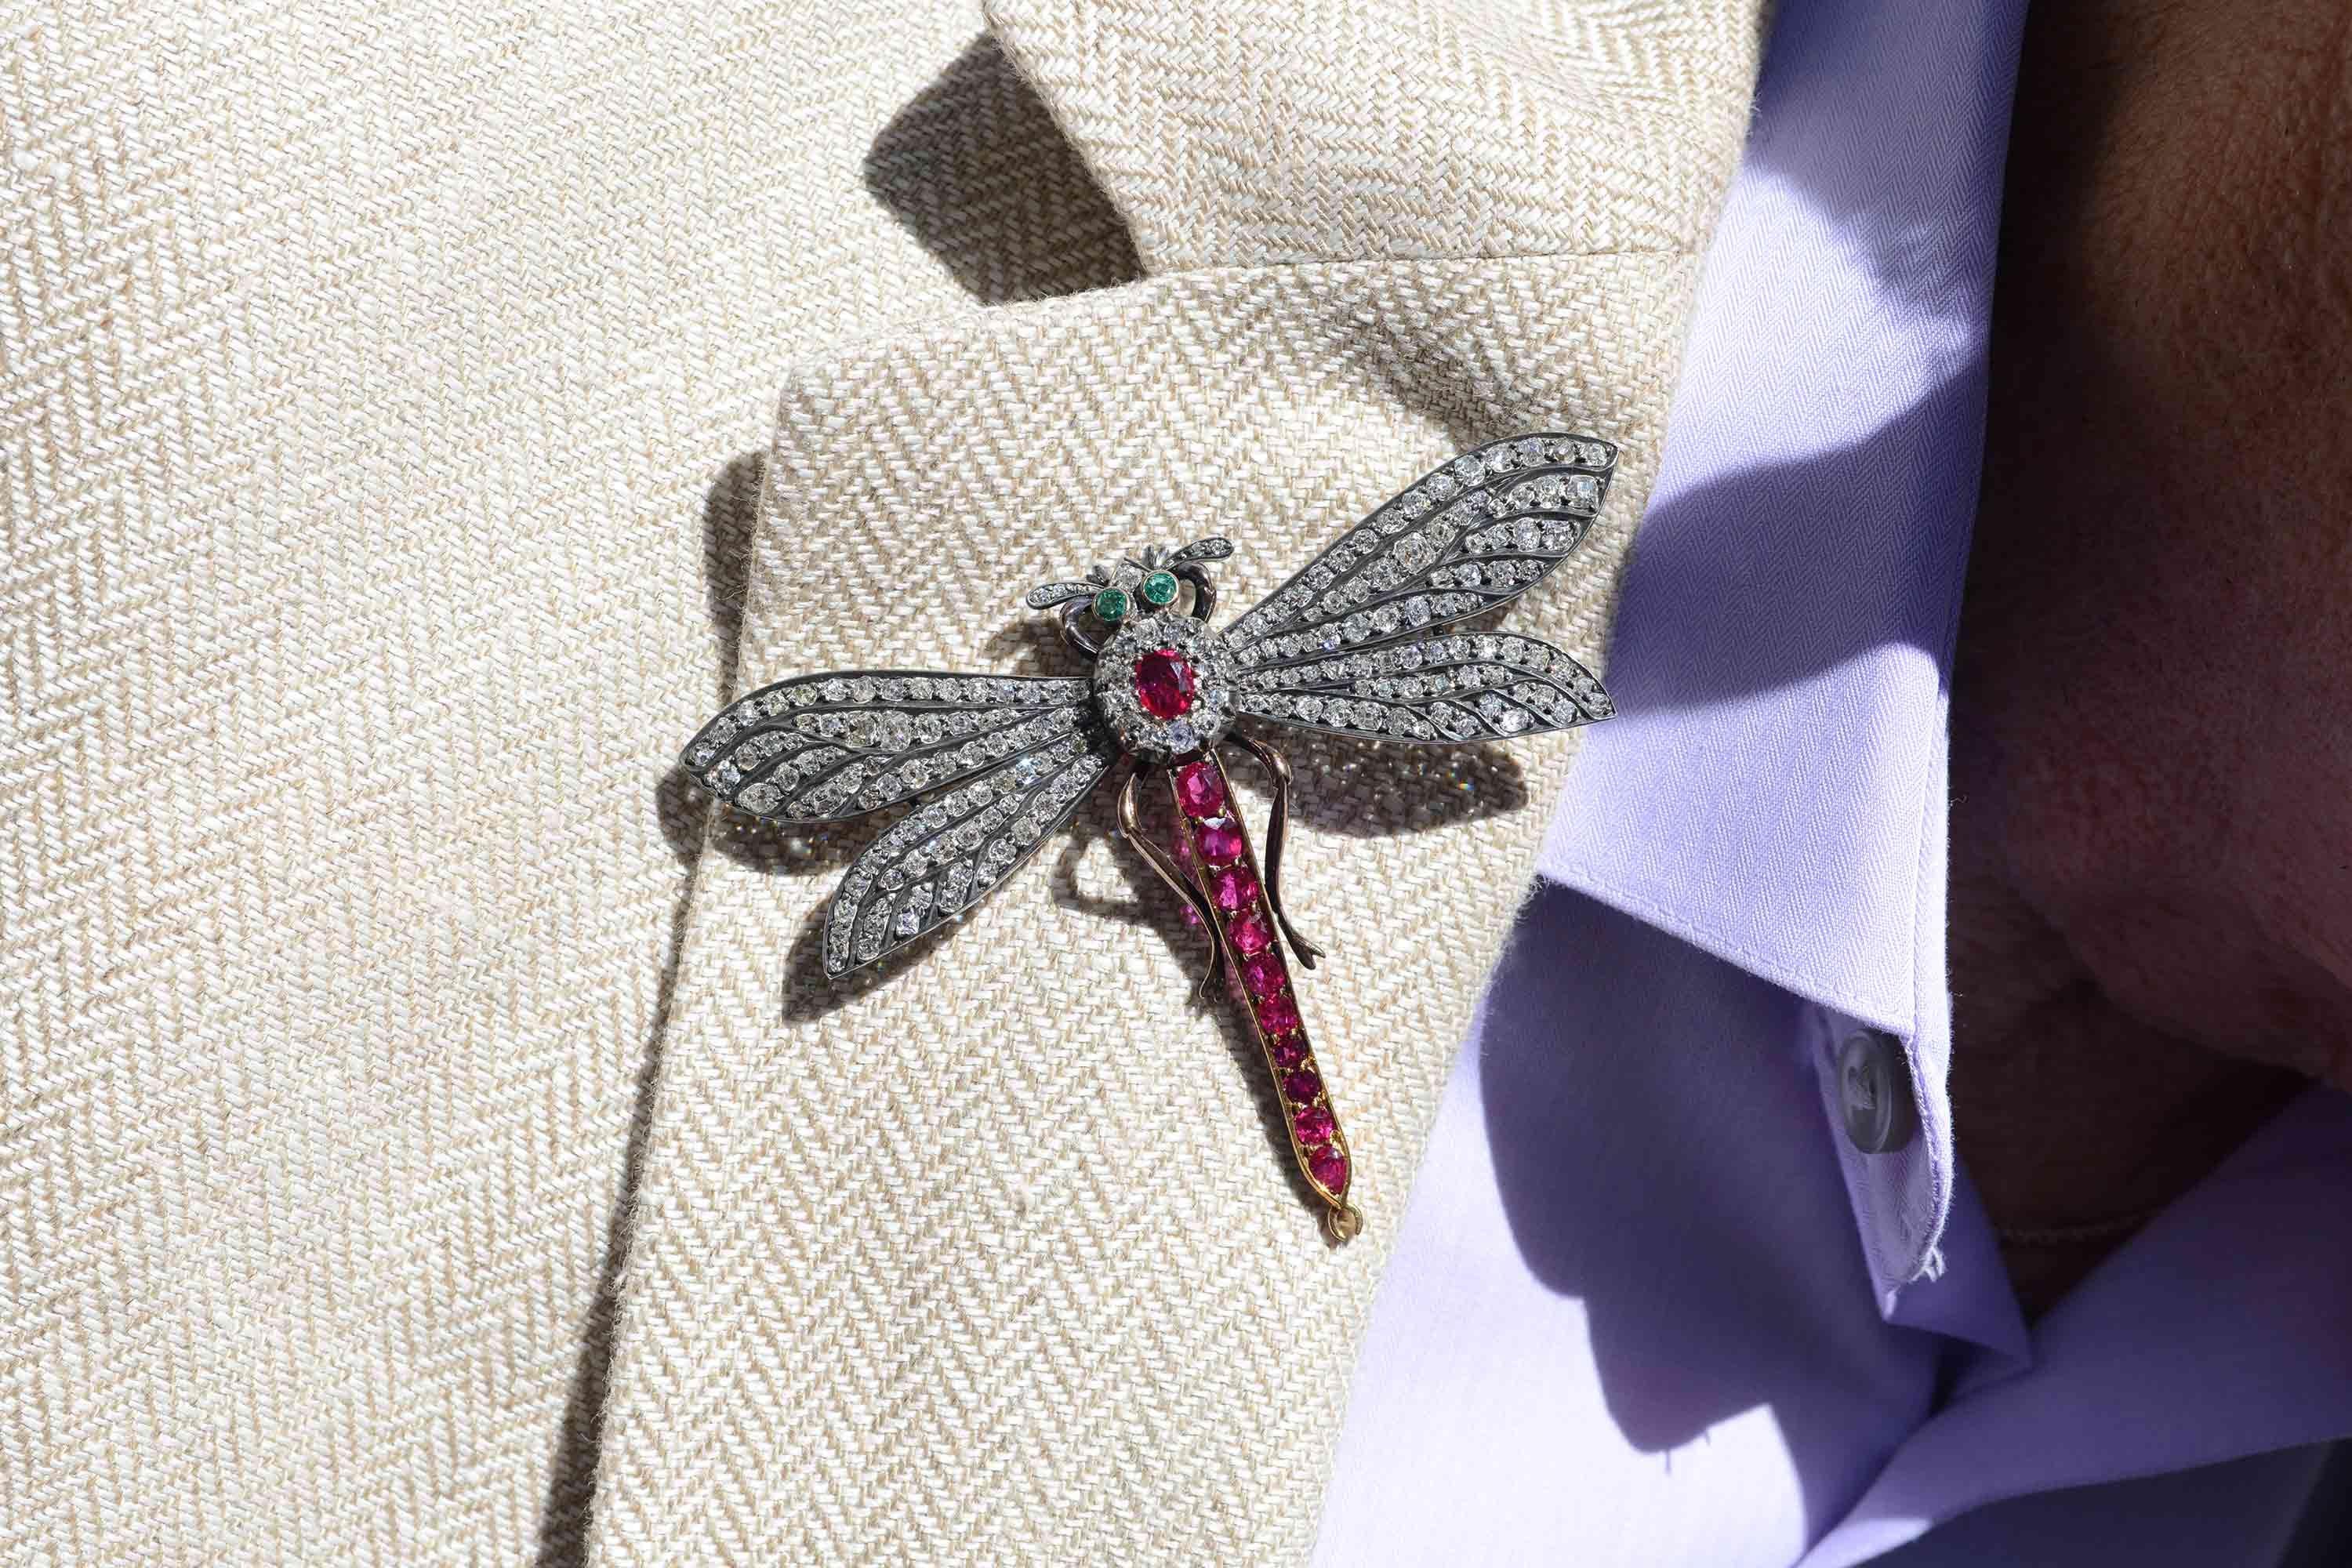 Let this stunning, authentic, 140 year old antique Victorian dragonfly brooch whisk you away on its shimmering, diamond embedded wings. Boasting 6 carats of old mine cut diamonds and adorned with 3 carats of deep, purplish-red rubies with